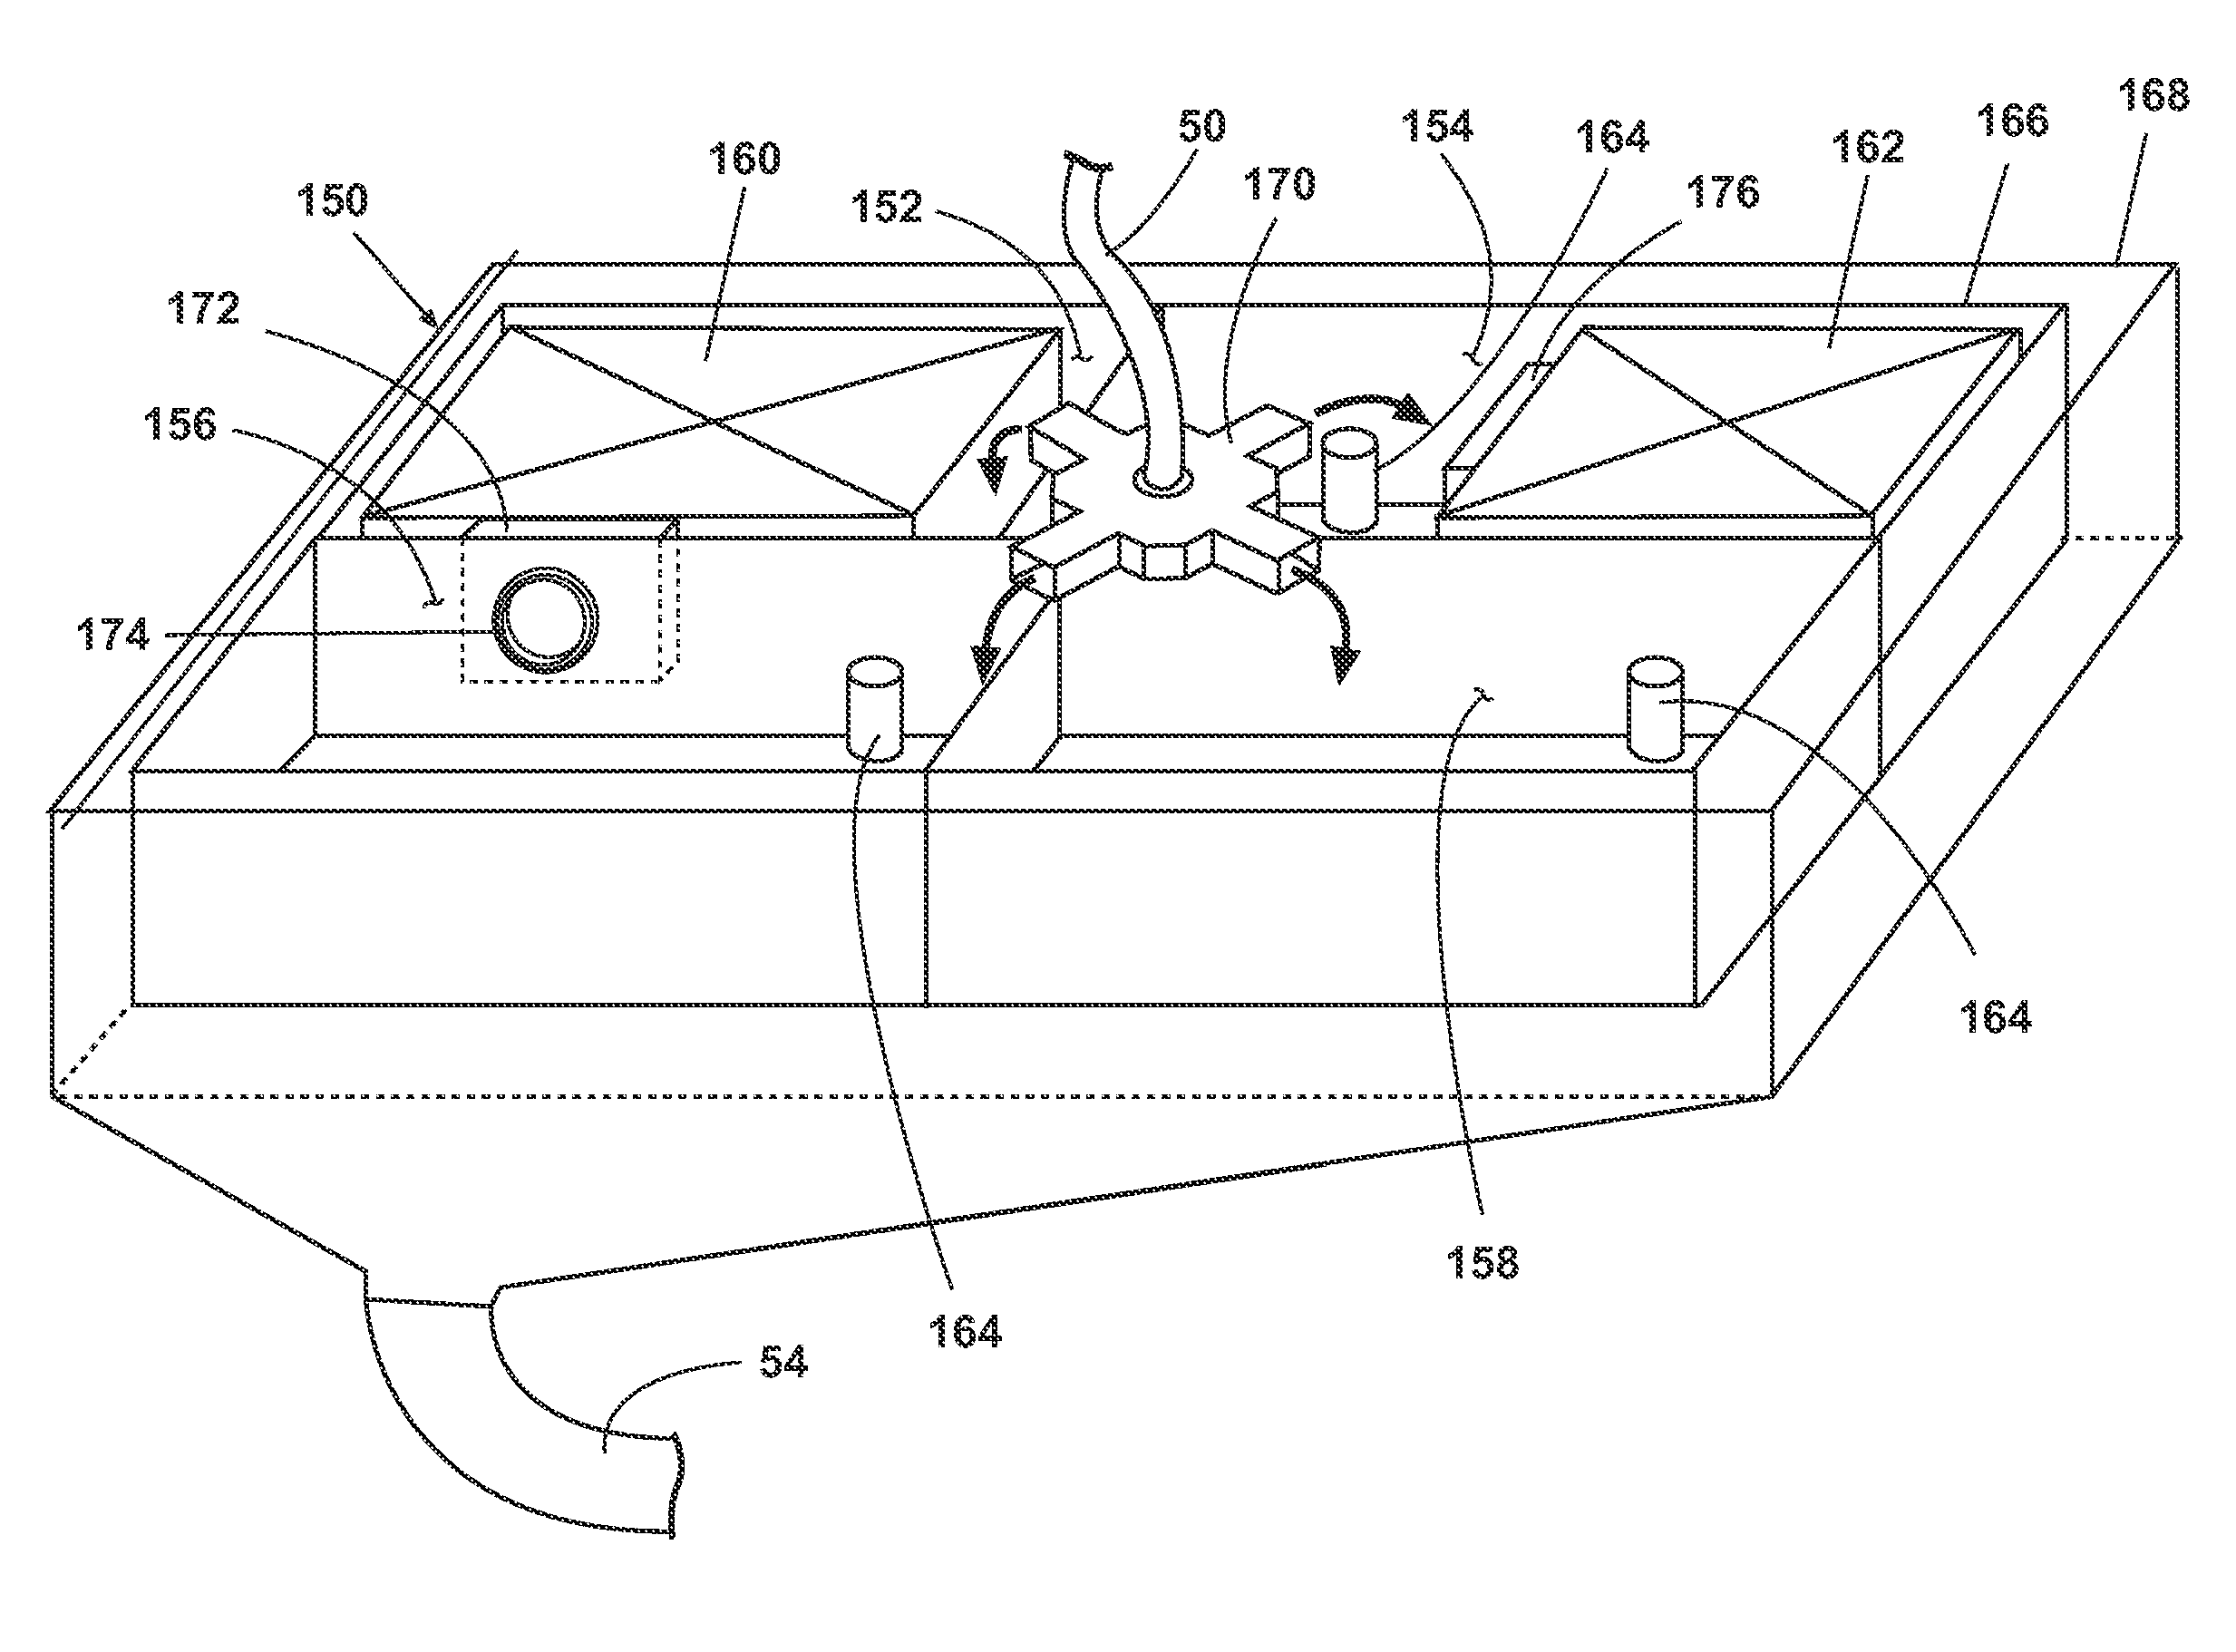 Household cleaning appliance with a single water flow path for both non-bulk and bulk dispensing